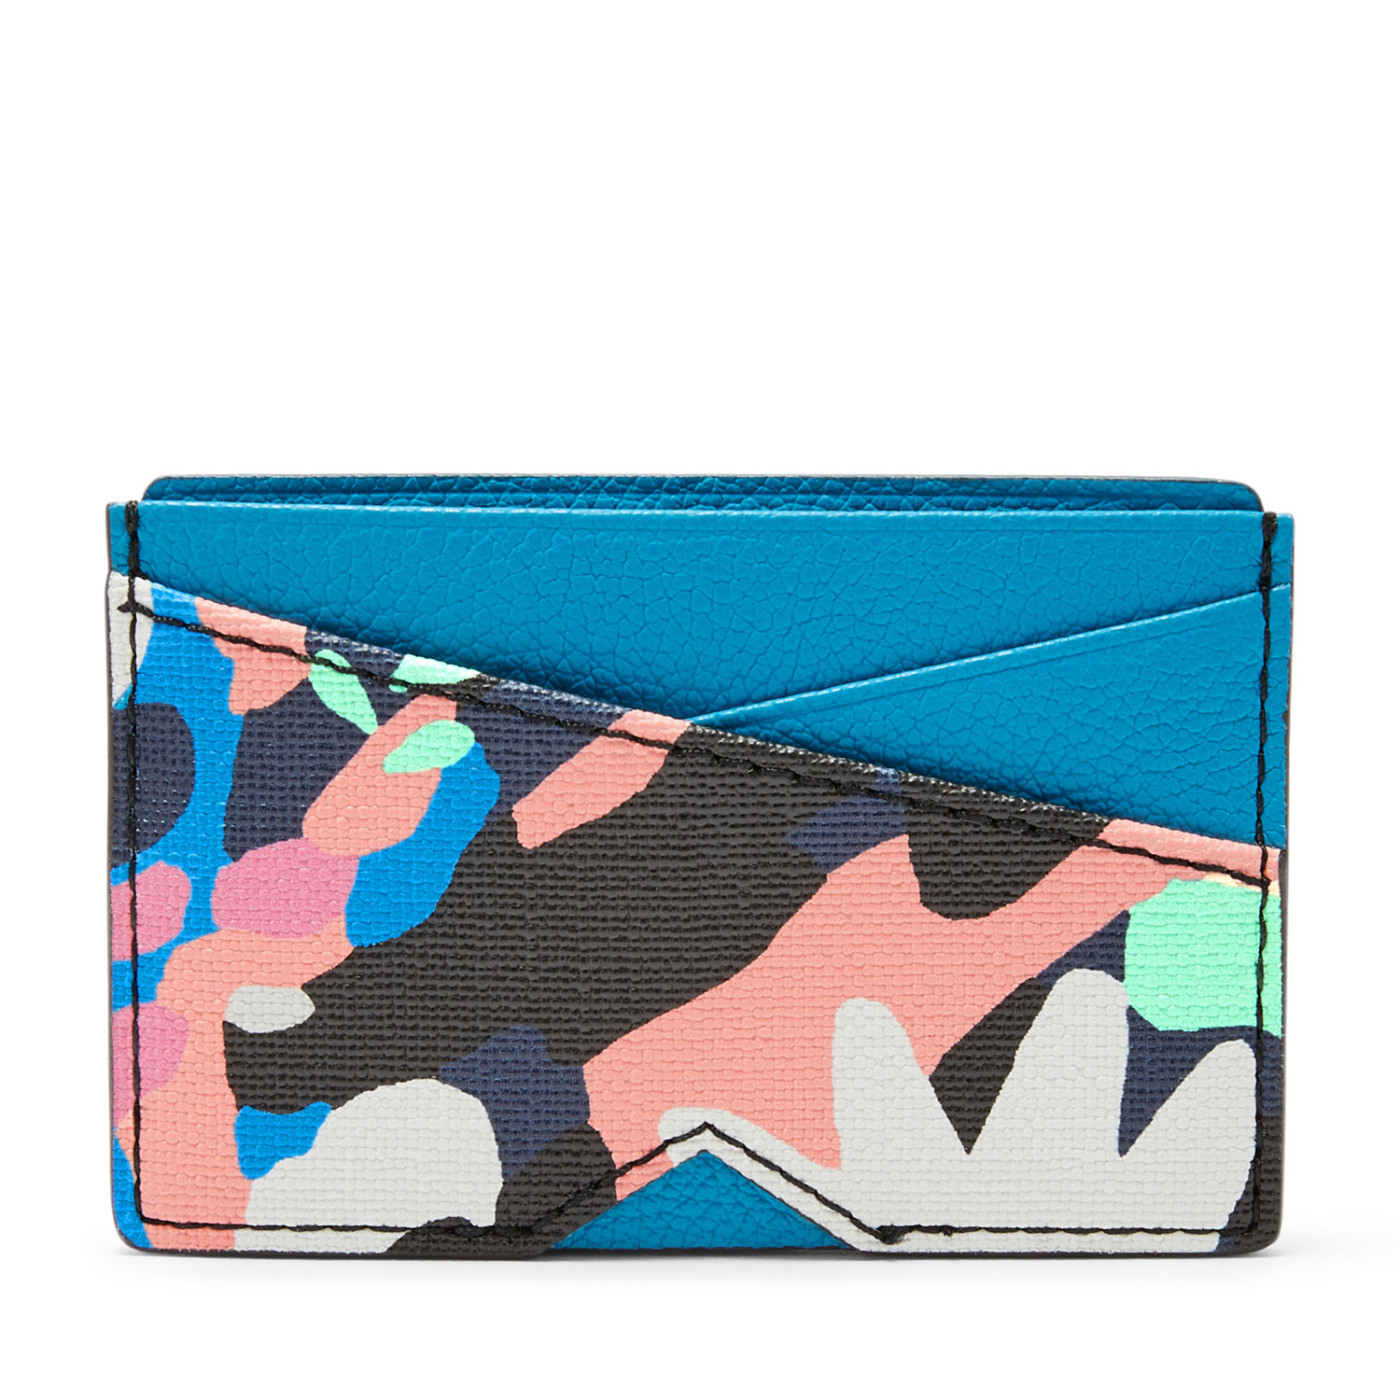 woocommerce-673321-2209615.cloudwaysapps.com-fossil-womens-black-floral-leather-card-holder-case